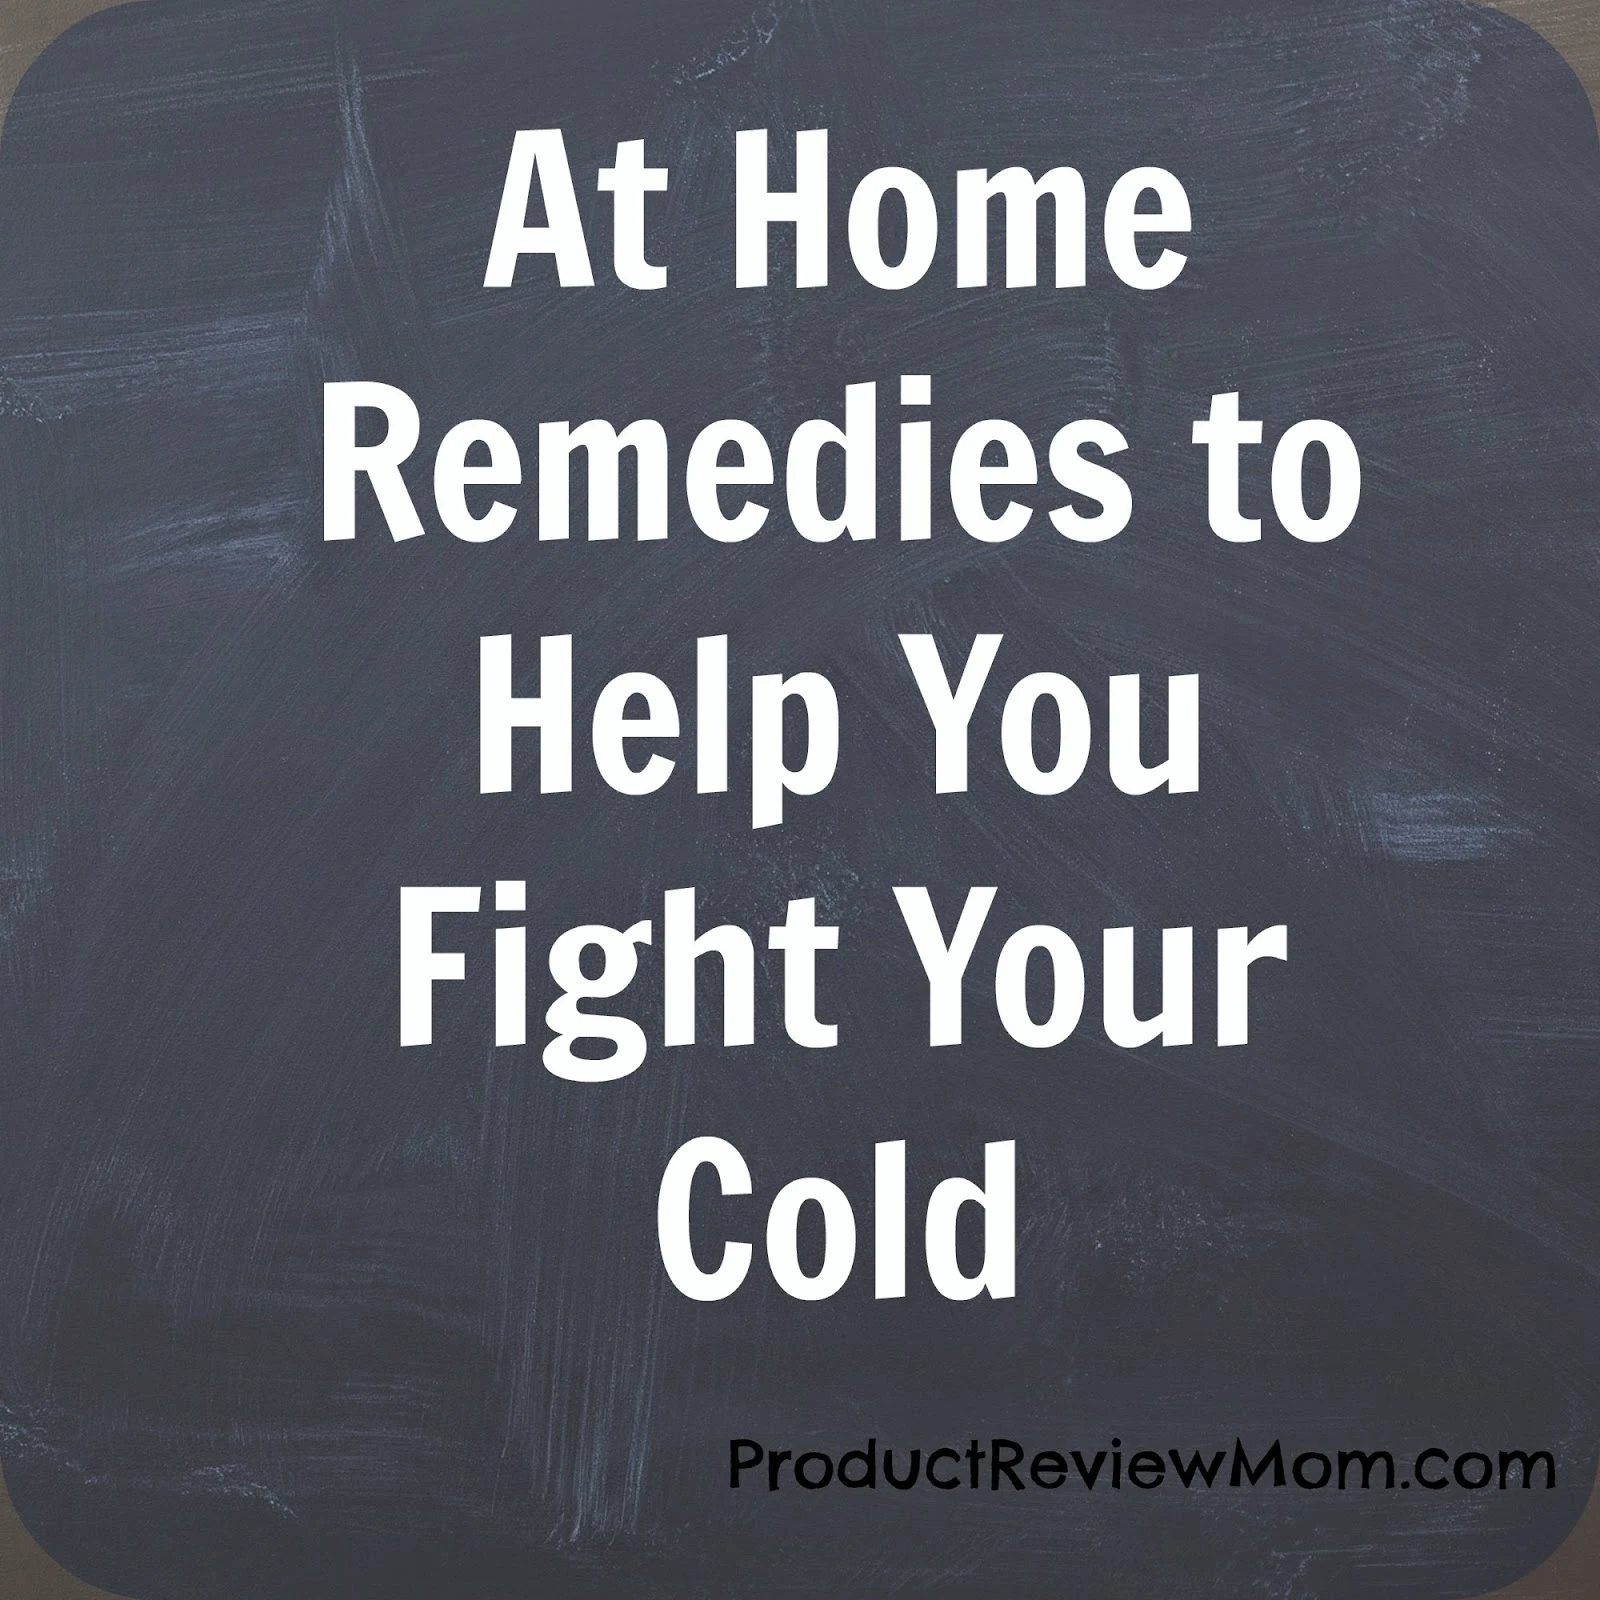 At Home Remedies to Help You Fight Your Cold via www.productreviewmom.com